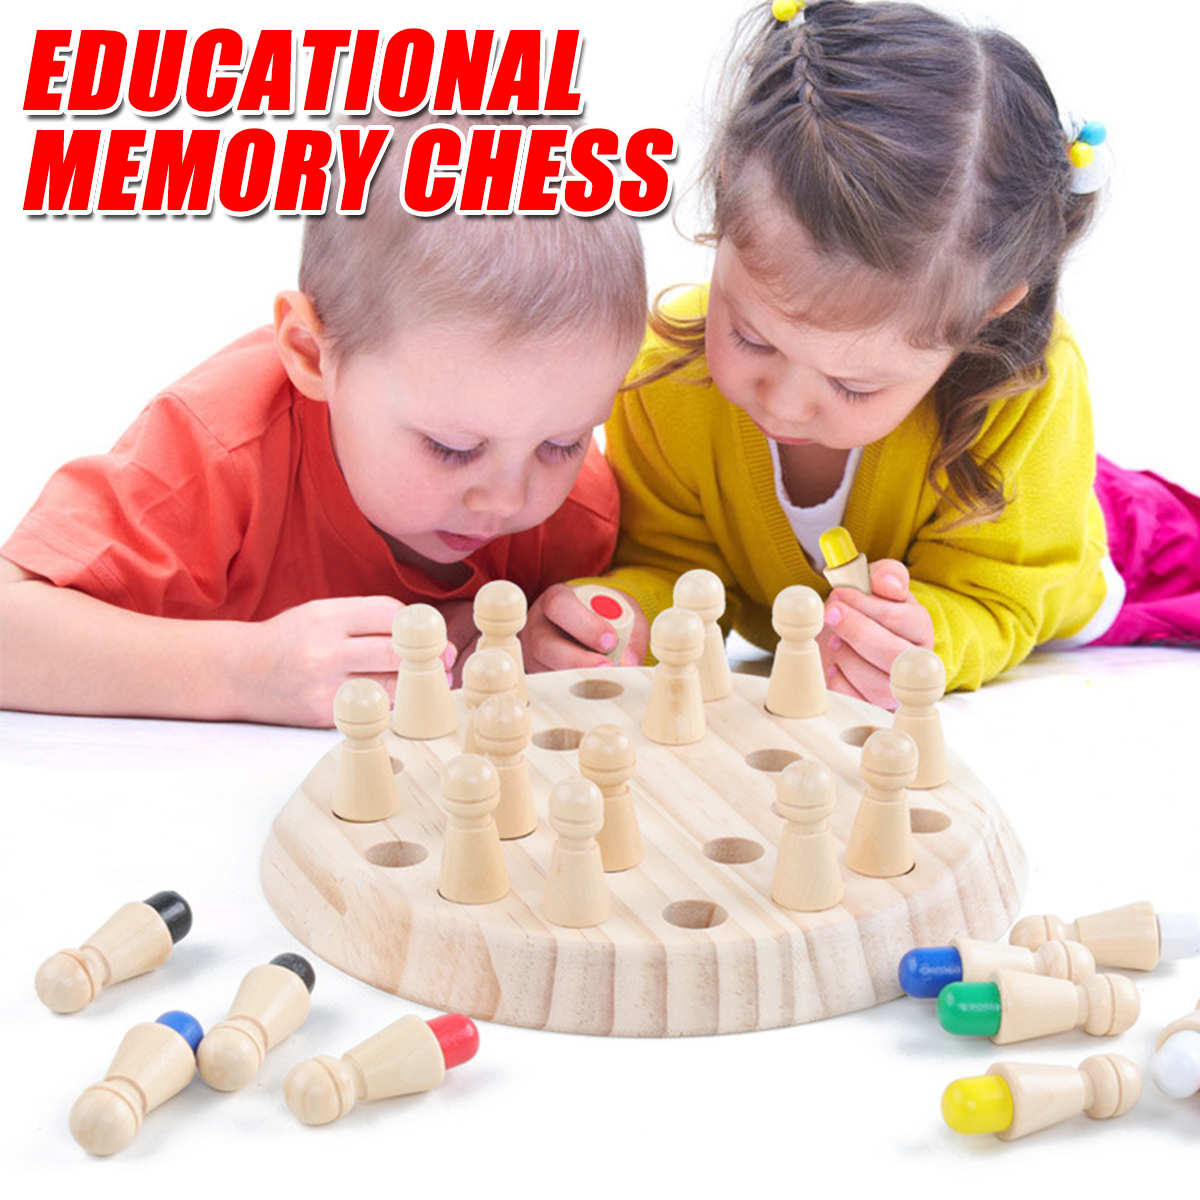 Montessori-Wooden-Colorful-Memory-Chess-Game-Clip-Beads-3D-Puzzle-Learning-Educational-Toys-for-Chil-1723192-1